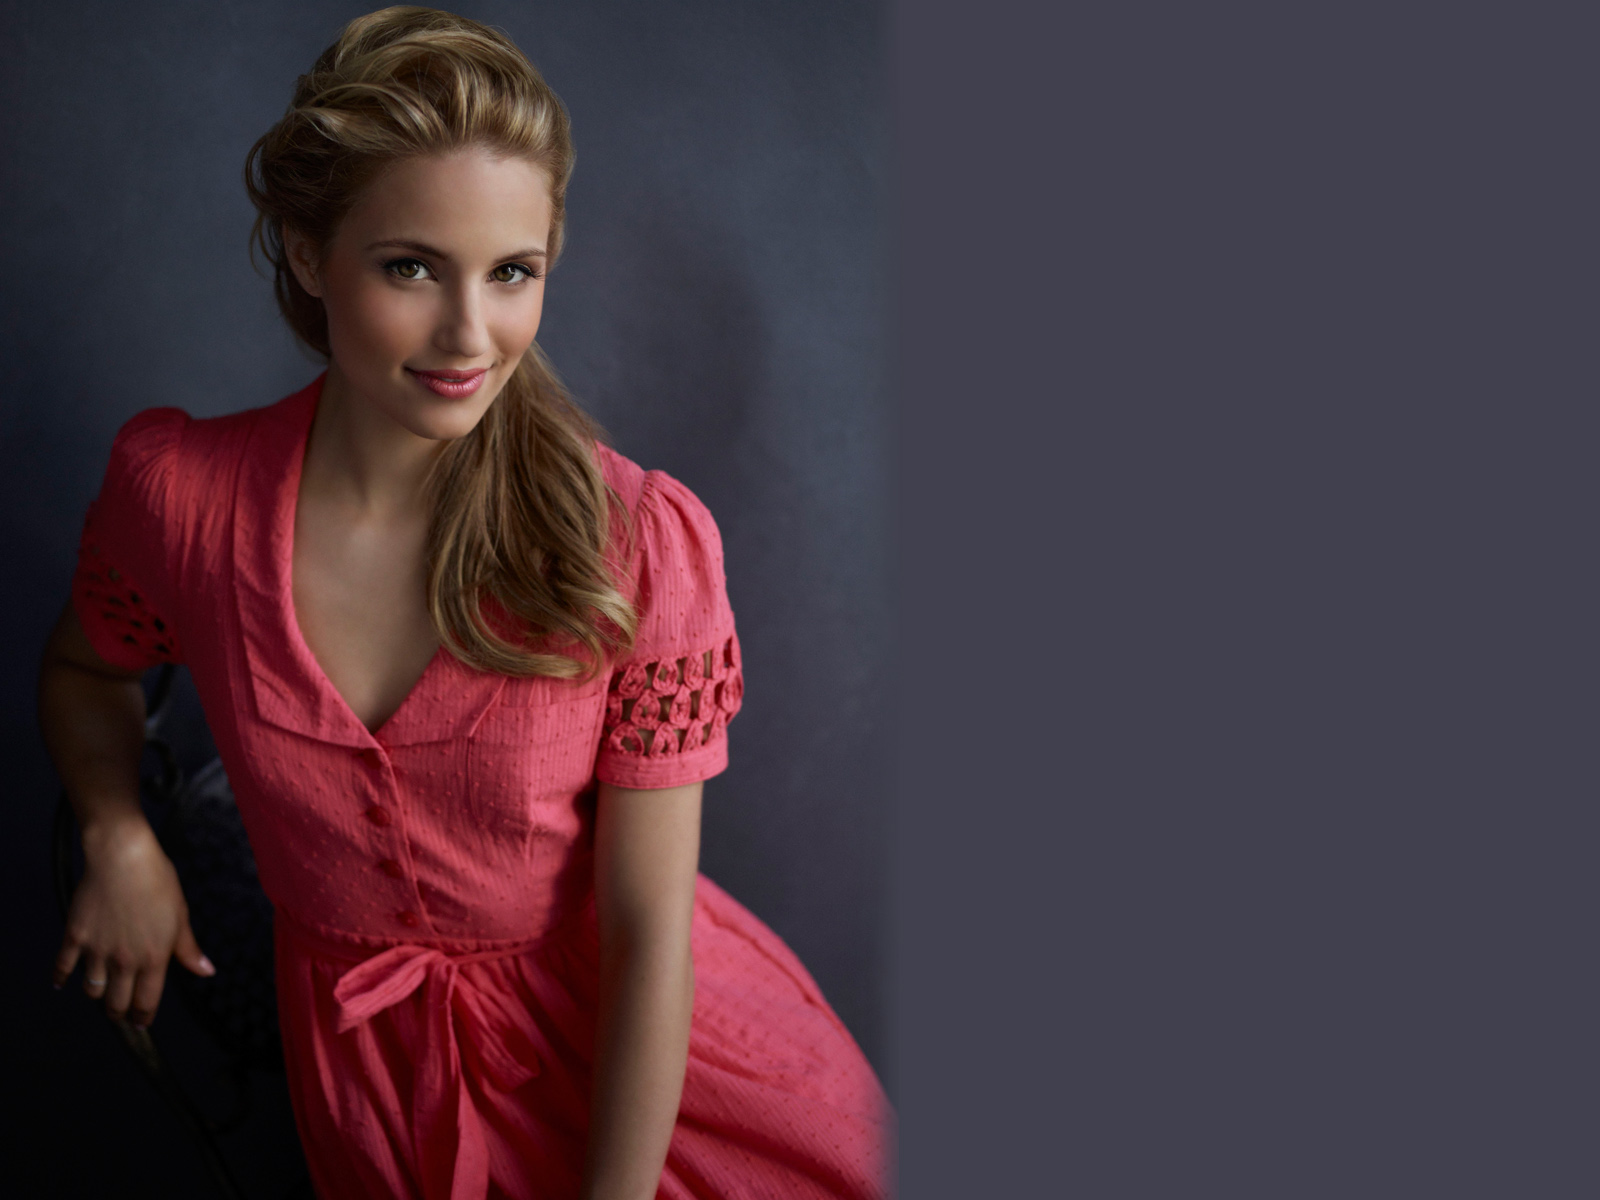 Dianna Agron Red Dress Wallpapers,Dianna Agron Wallpapers